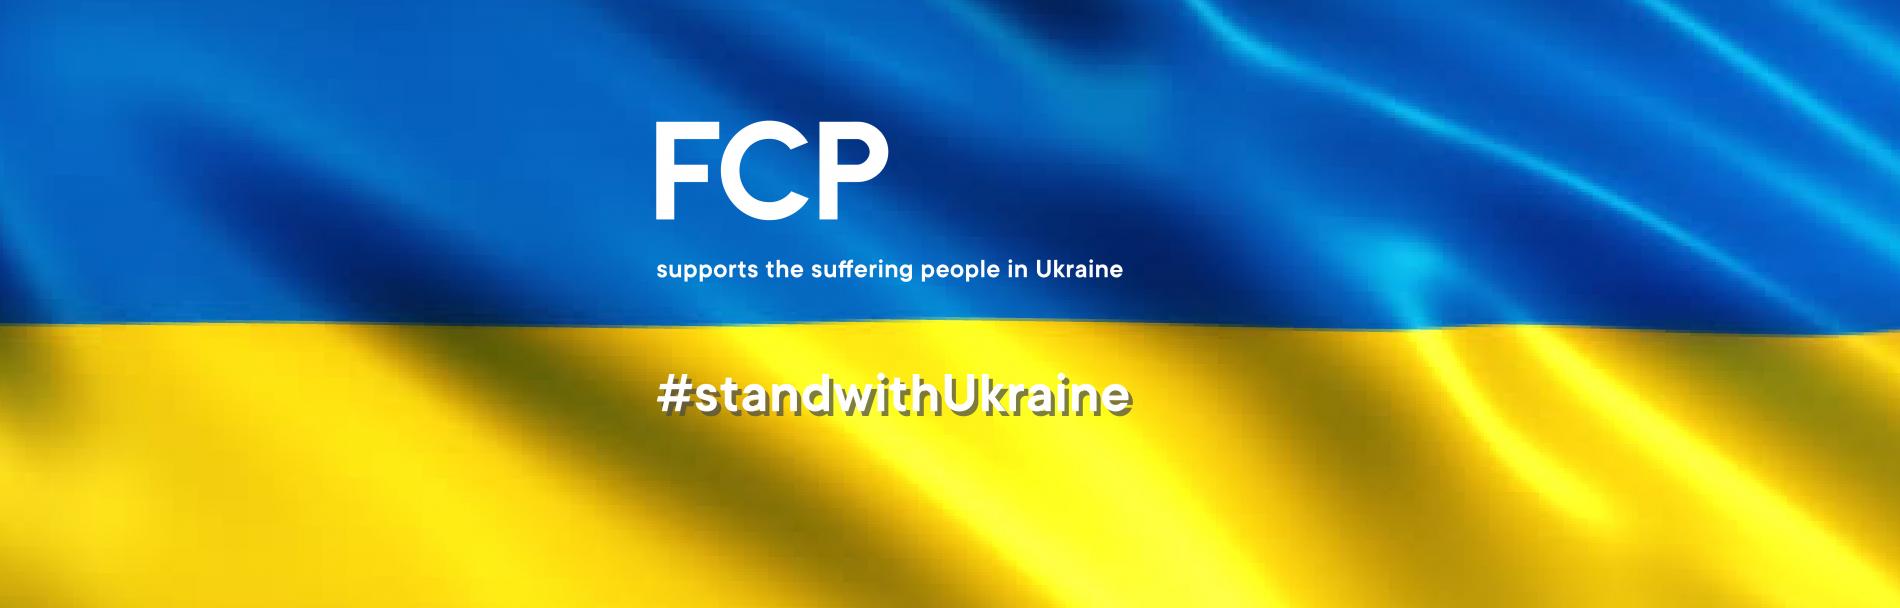 FCP supports the suffering people in Ukraine